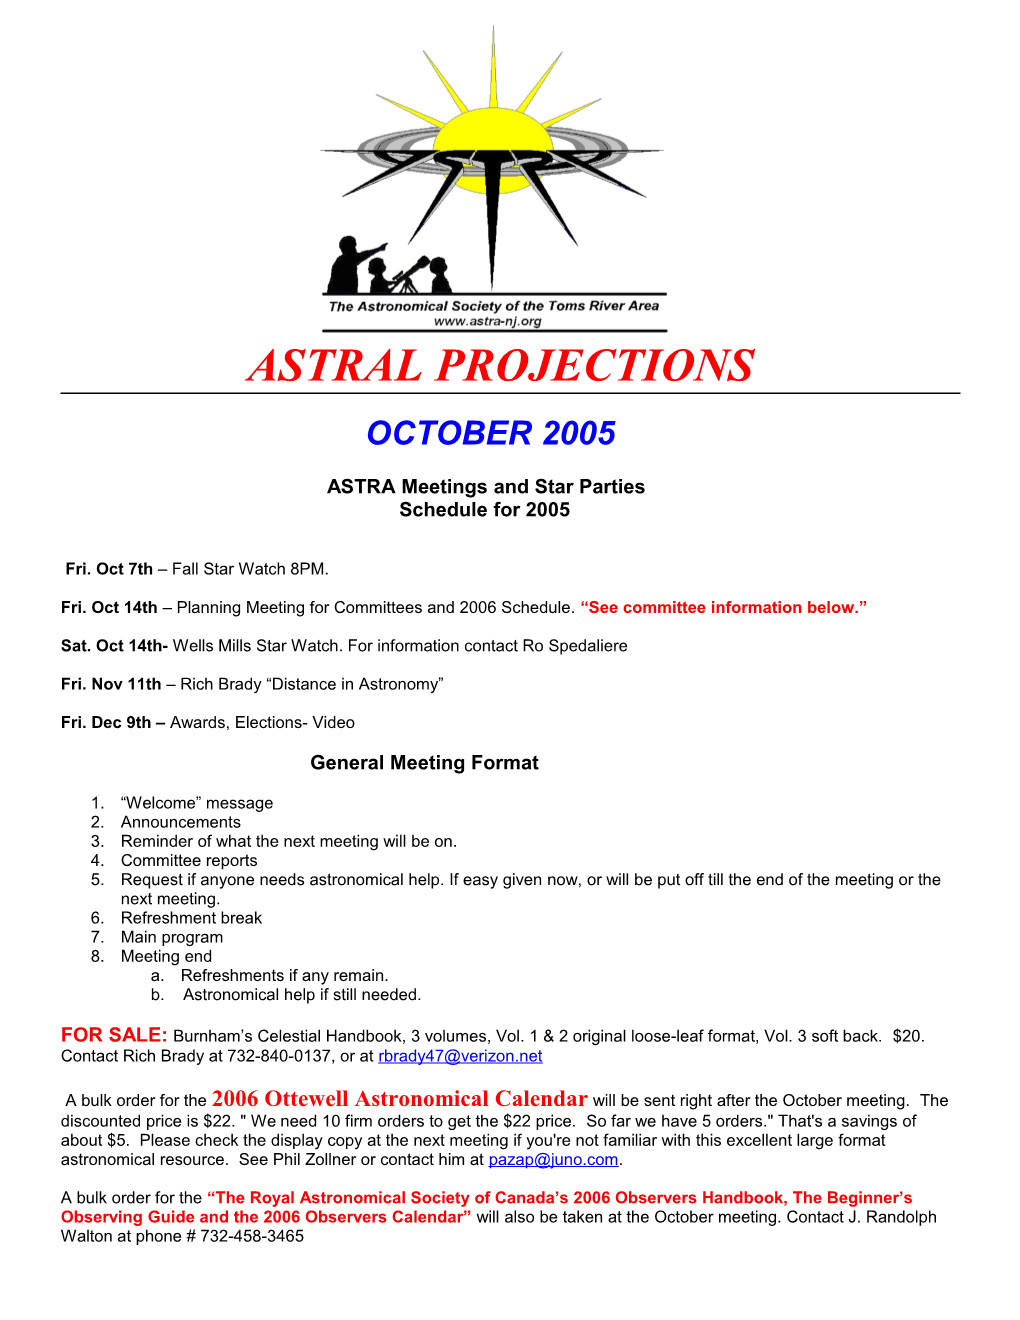 ASTRA Meetings and Star Parties